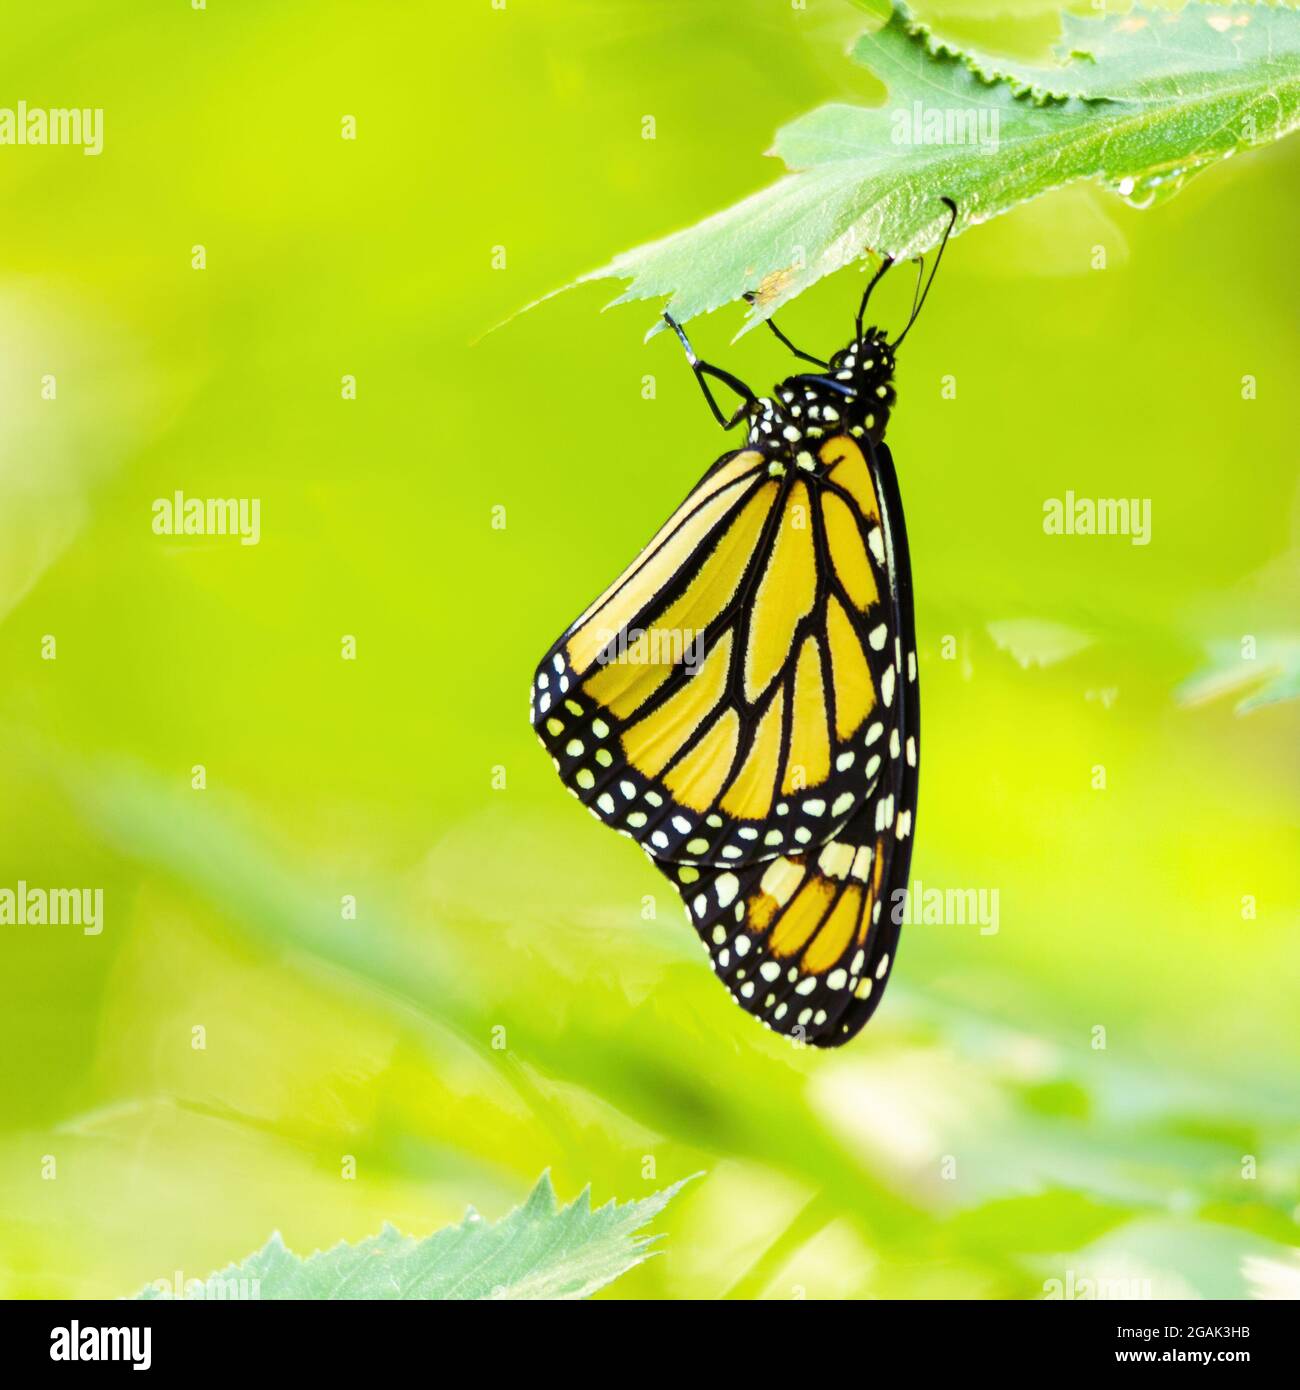 Newly released monarch butterfly hanging from the underside of a leaf against a green blurry background. Stock Photo